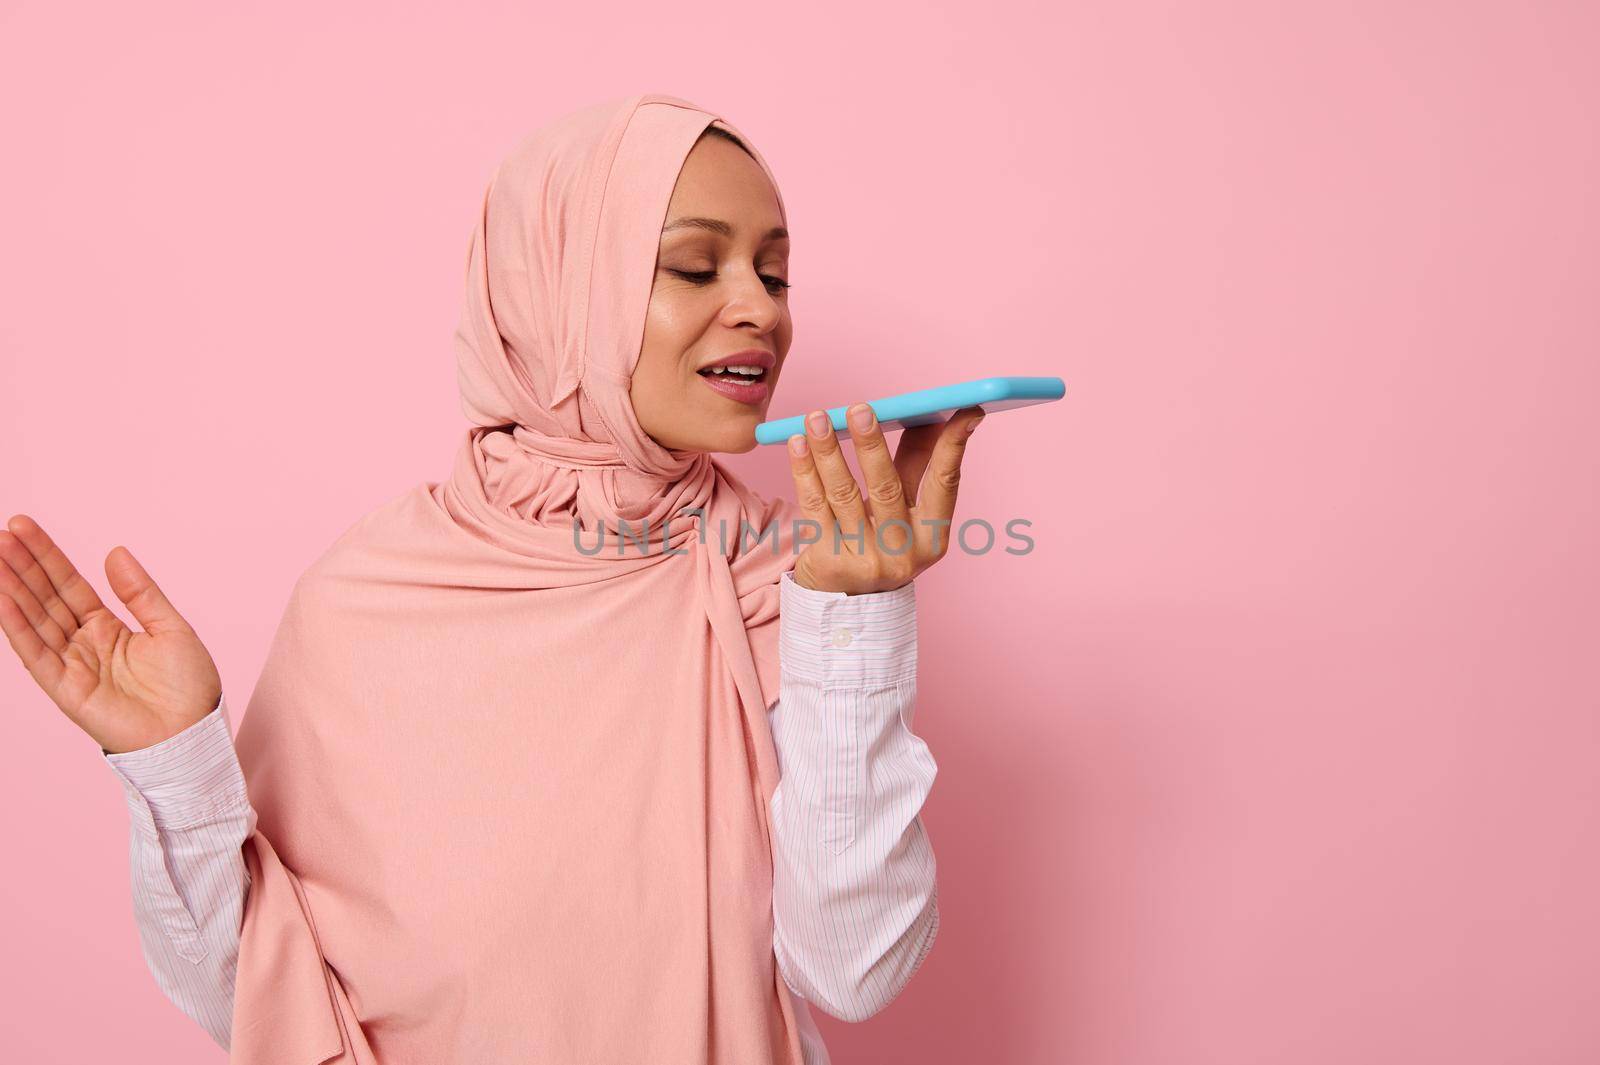 Muslim Arab beautiful gorgeous woman with covered head in pink hijab recording a voice message on her smartphone. Isolated portrait on pink pastel background, copy space for advertising by artgf